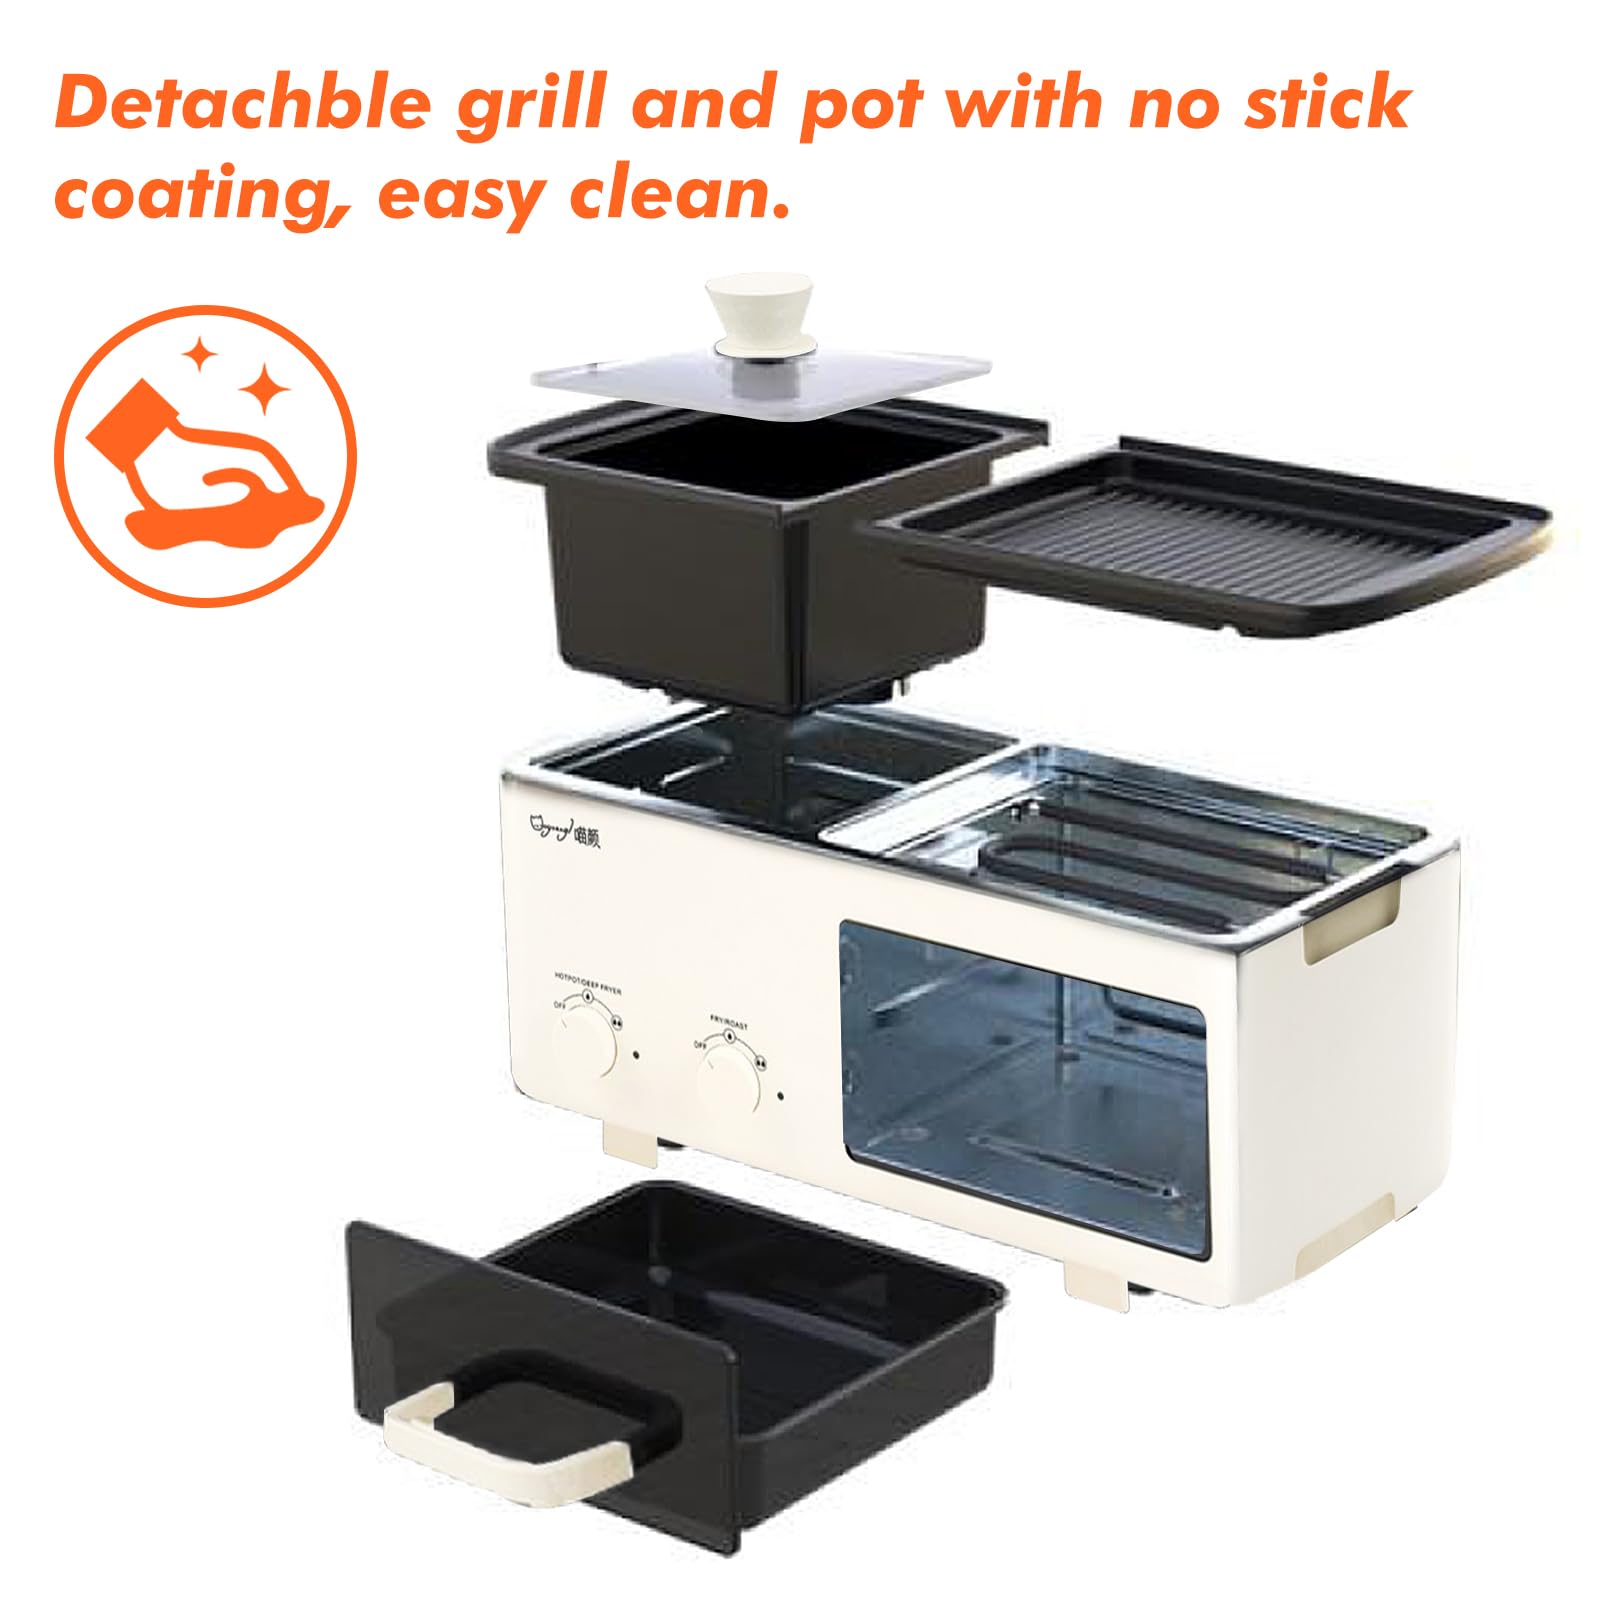 Newest 4 in 1 Hot Pot Electric with Grill and Frying Basket, Independent Dual Temperature Control, Fast Heating for Korean BBQ, Simmer, Boil, Fry, Roast, Off white